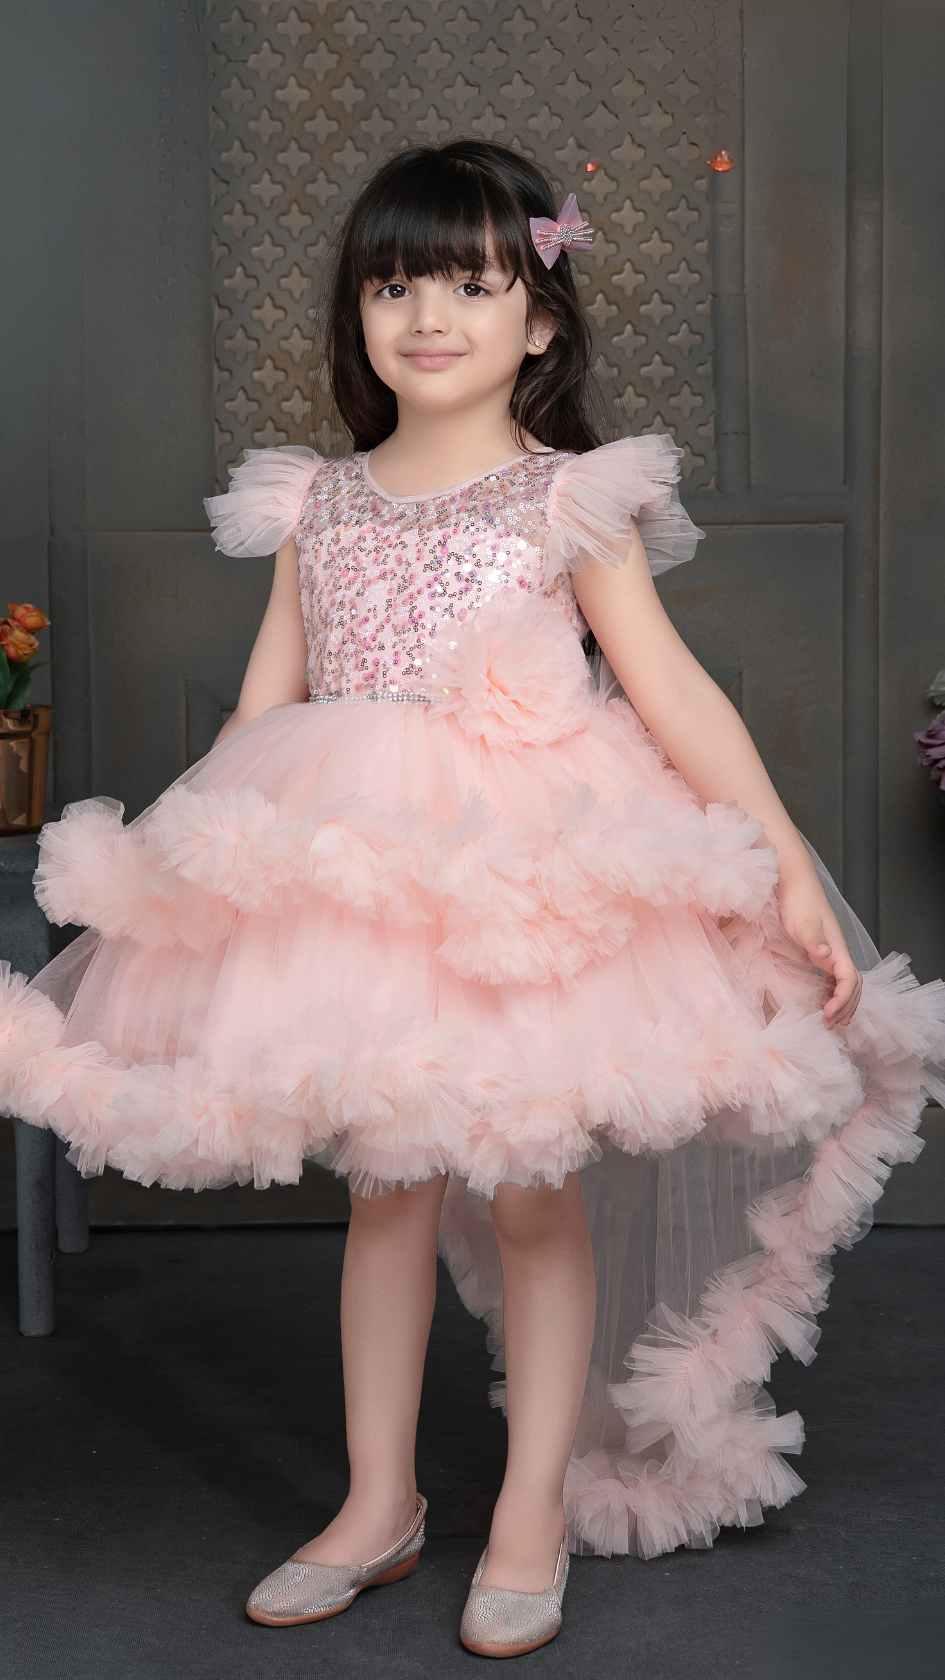 Peach Shimmer Tailback Party Wear Frock With Floral Embellishment For Girls - Lagorii Kids